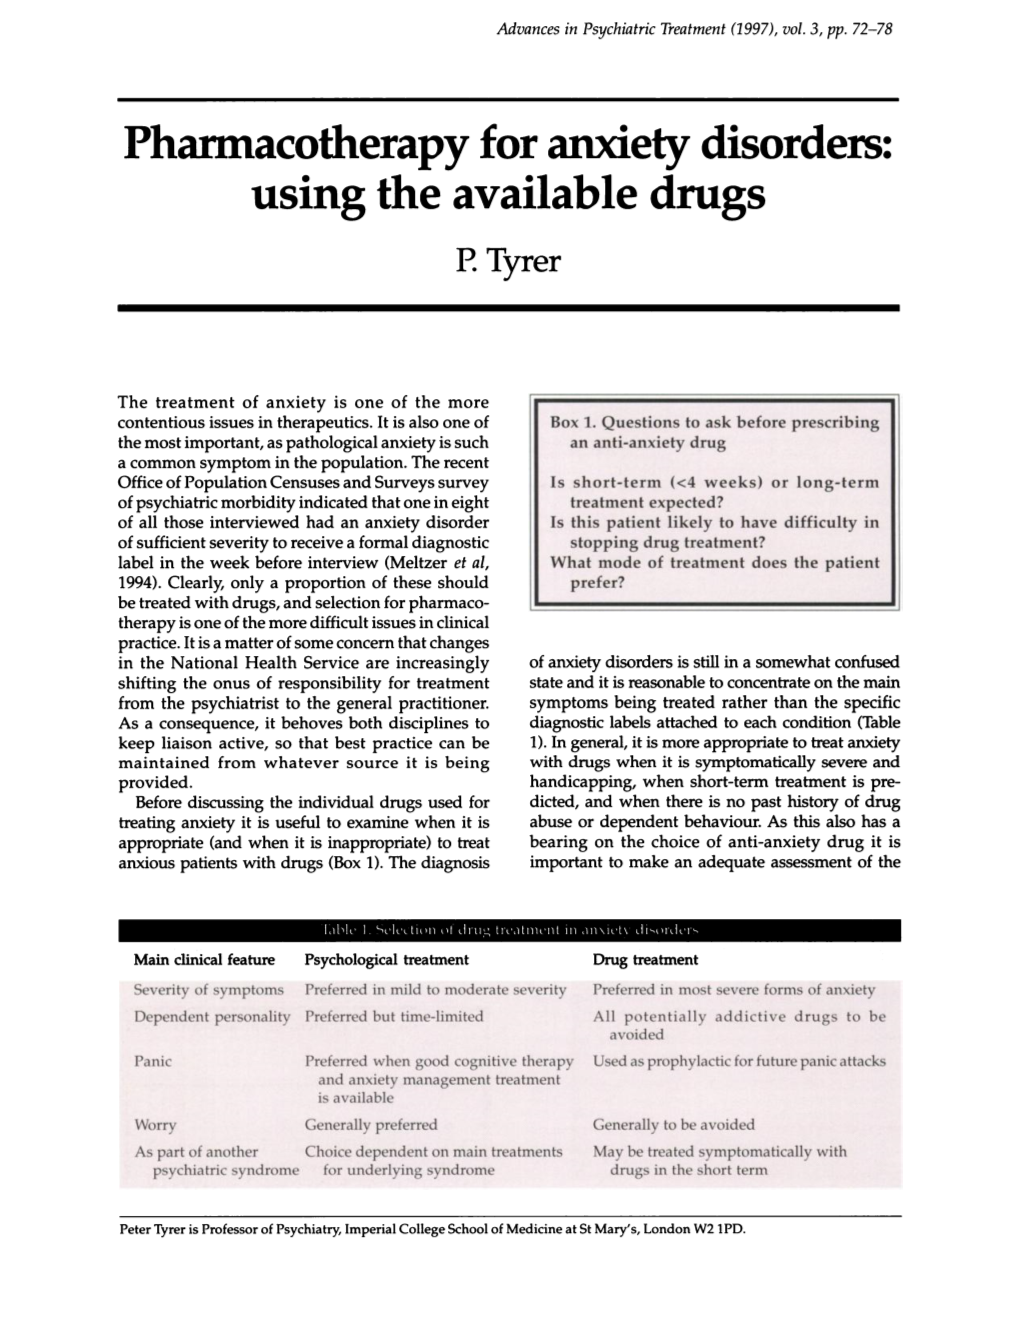 Pharmacotherapy for Anxiety Disorders: Using the Available Drugs P